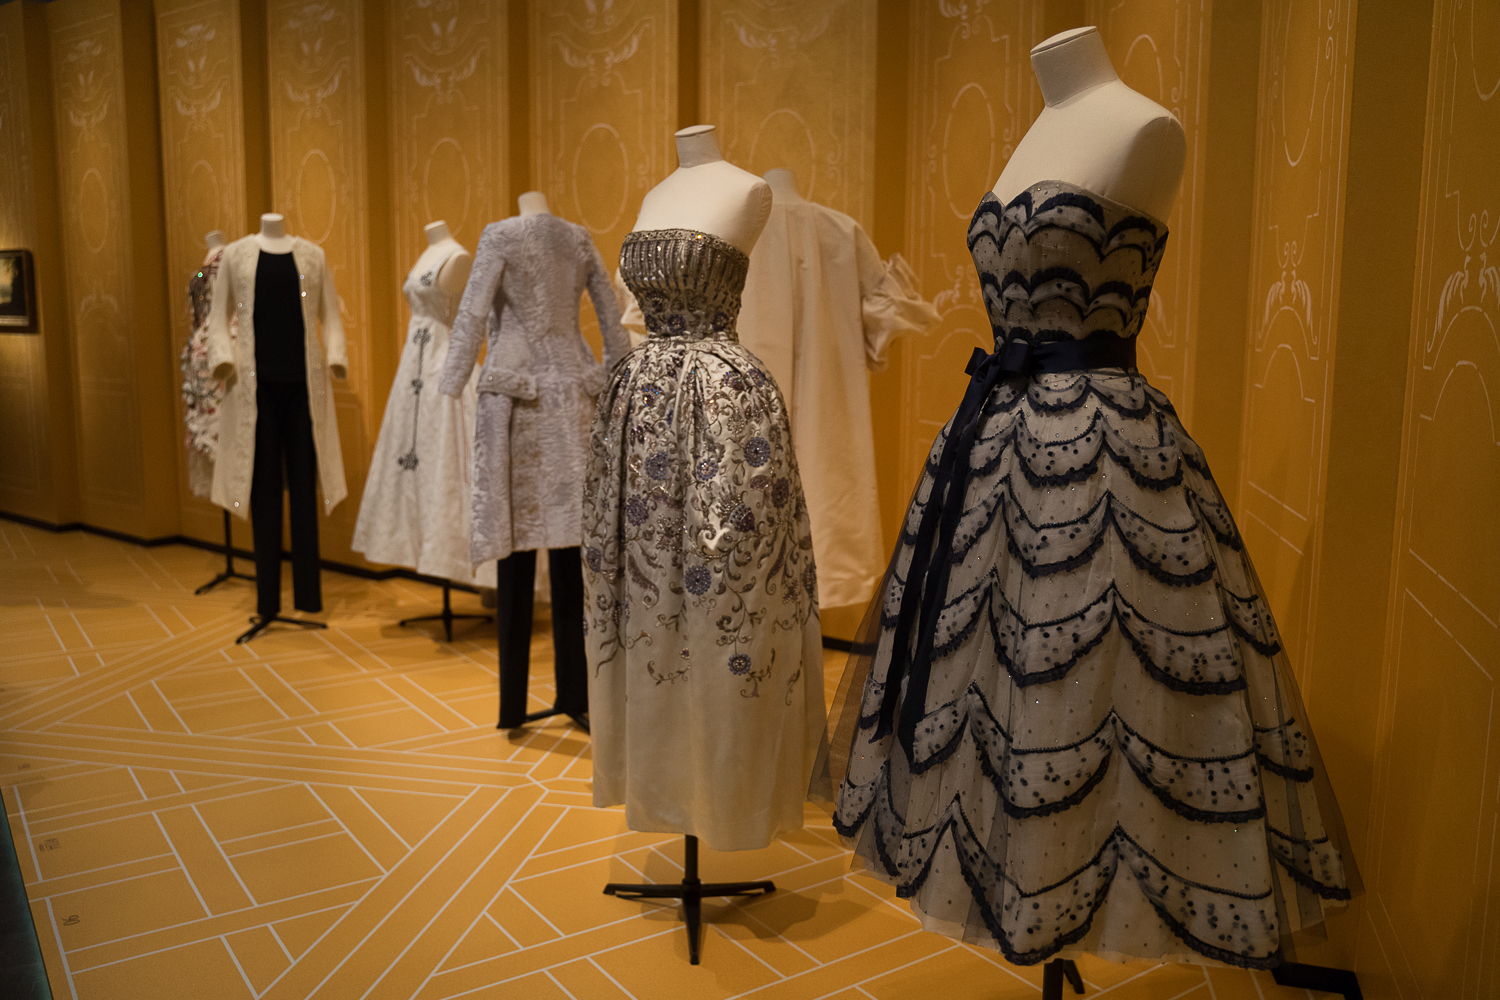 Dior: From Paris To The World Fashion Exhibit Is Breathtaking! — Ultra5280